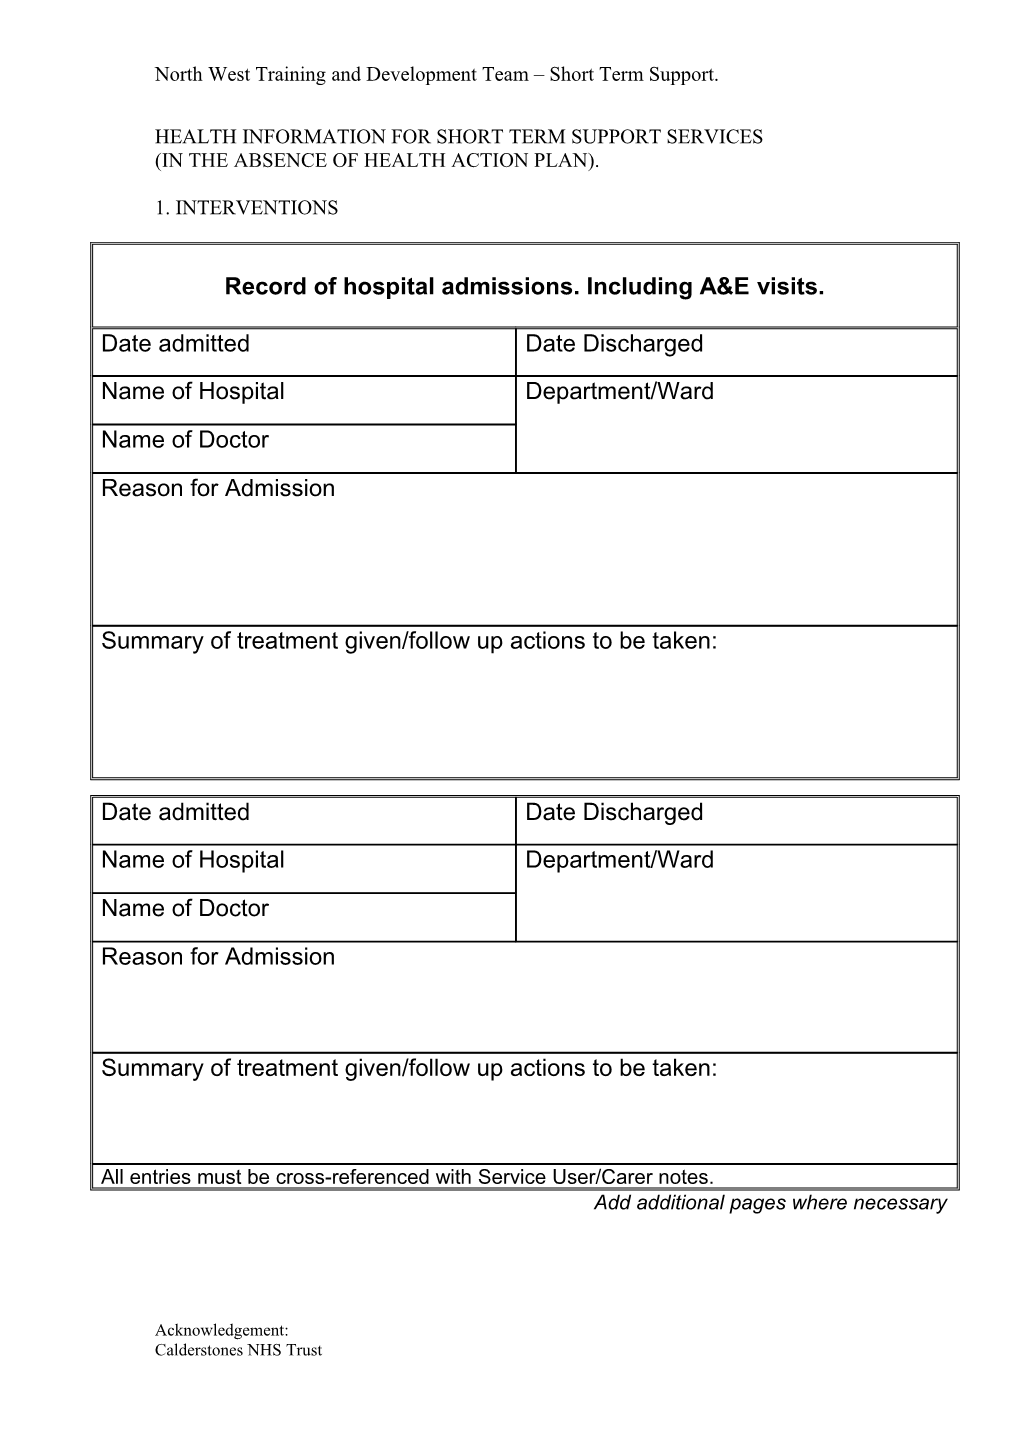 Record of Hospital Admissions